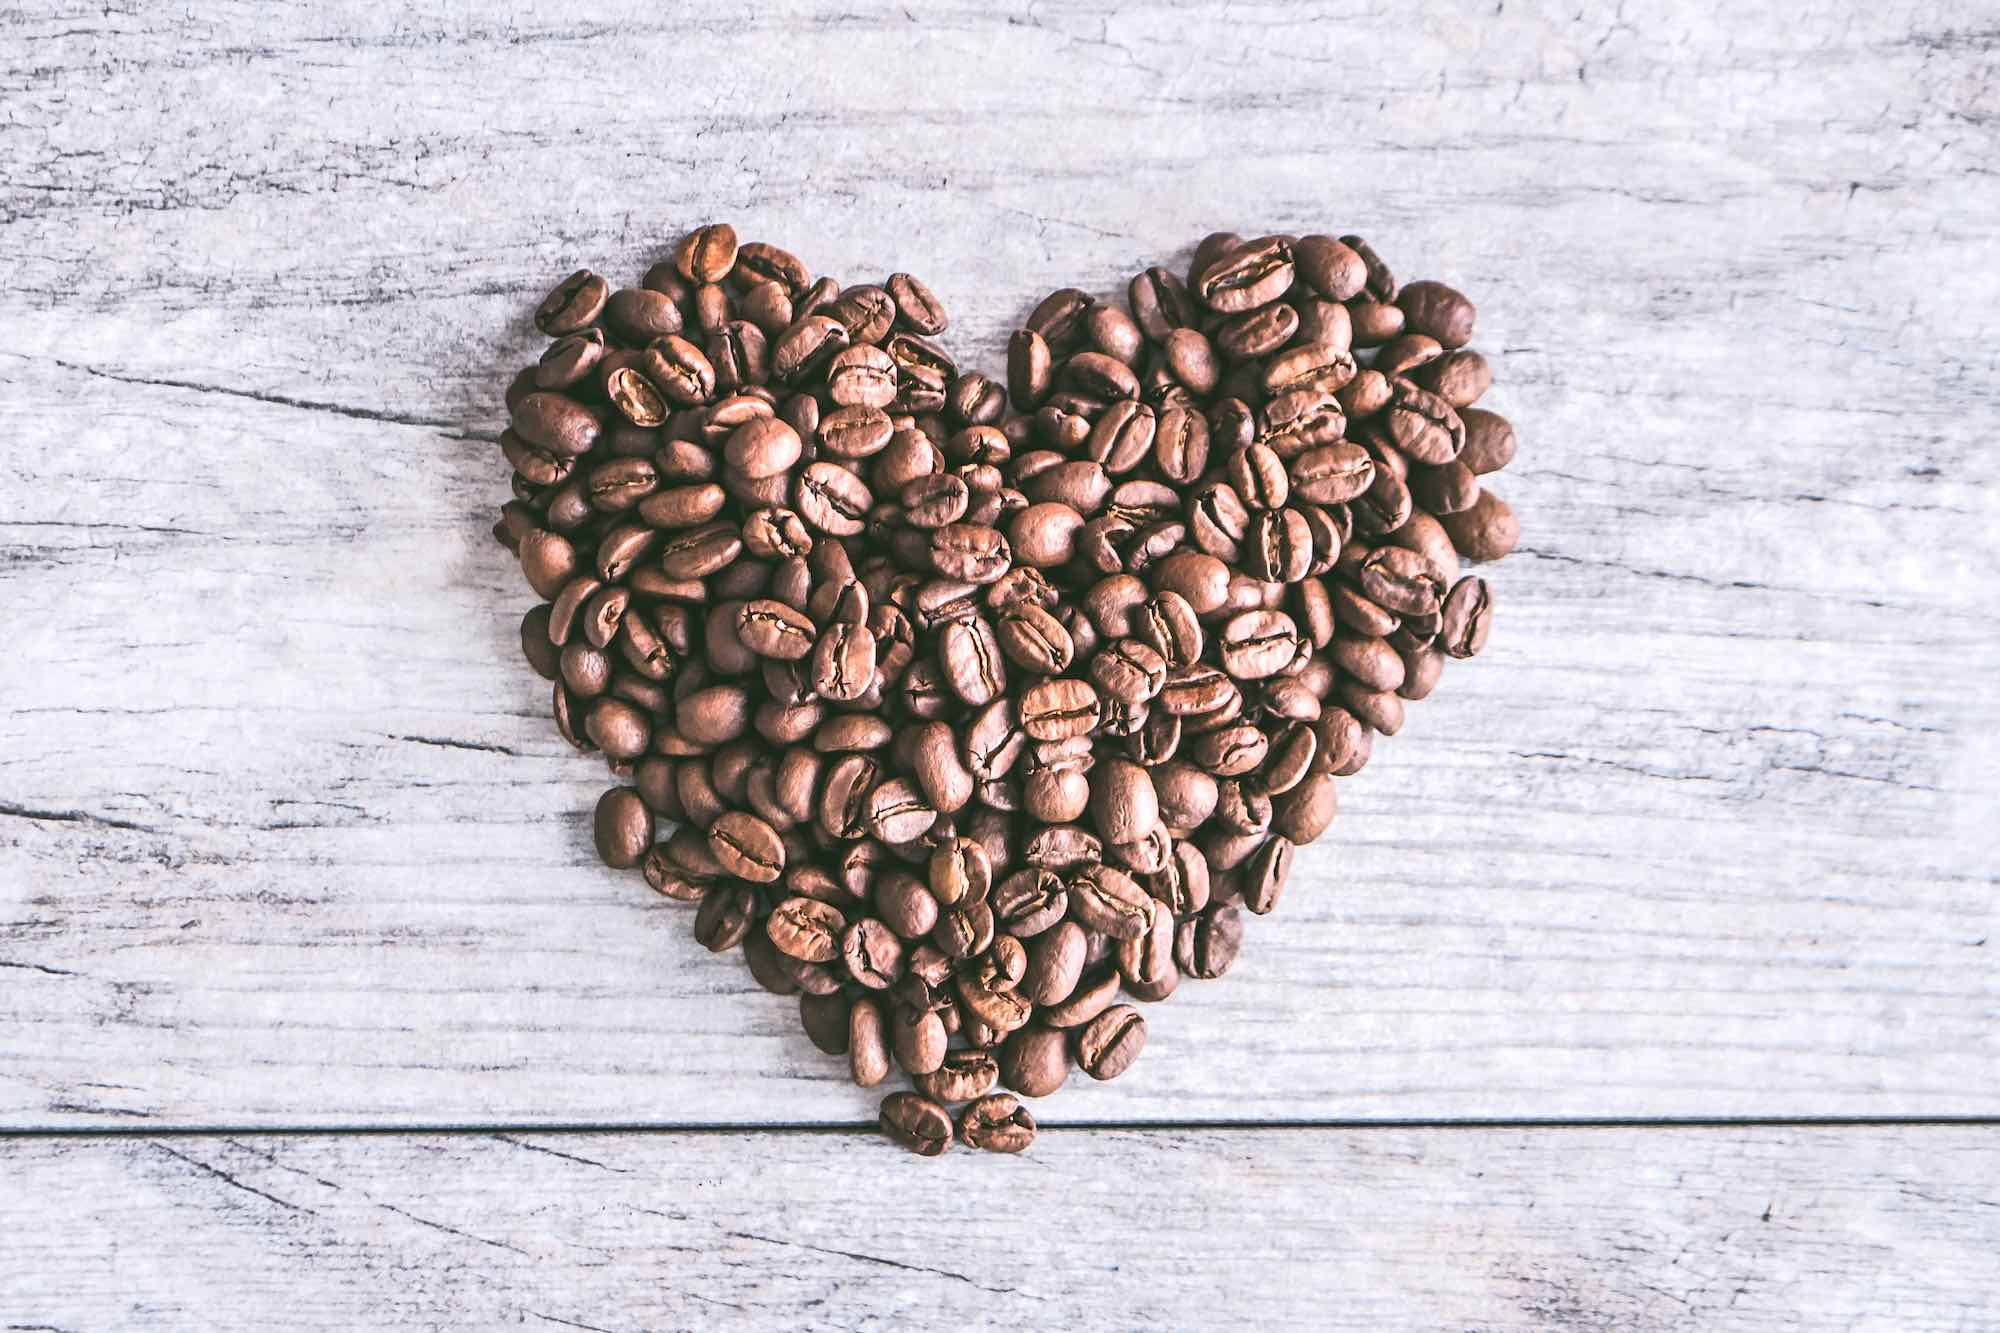 Decaf for health: the 5 science lessons that prove the decaf claims